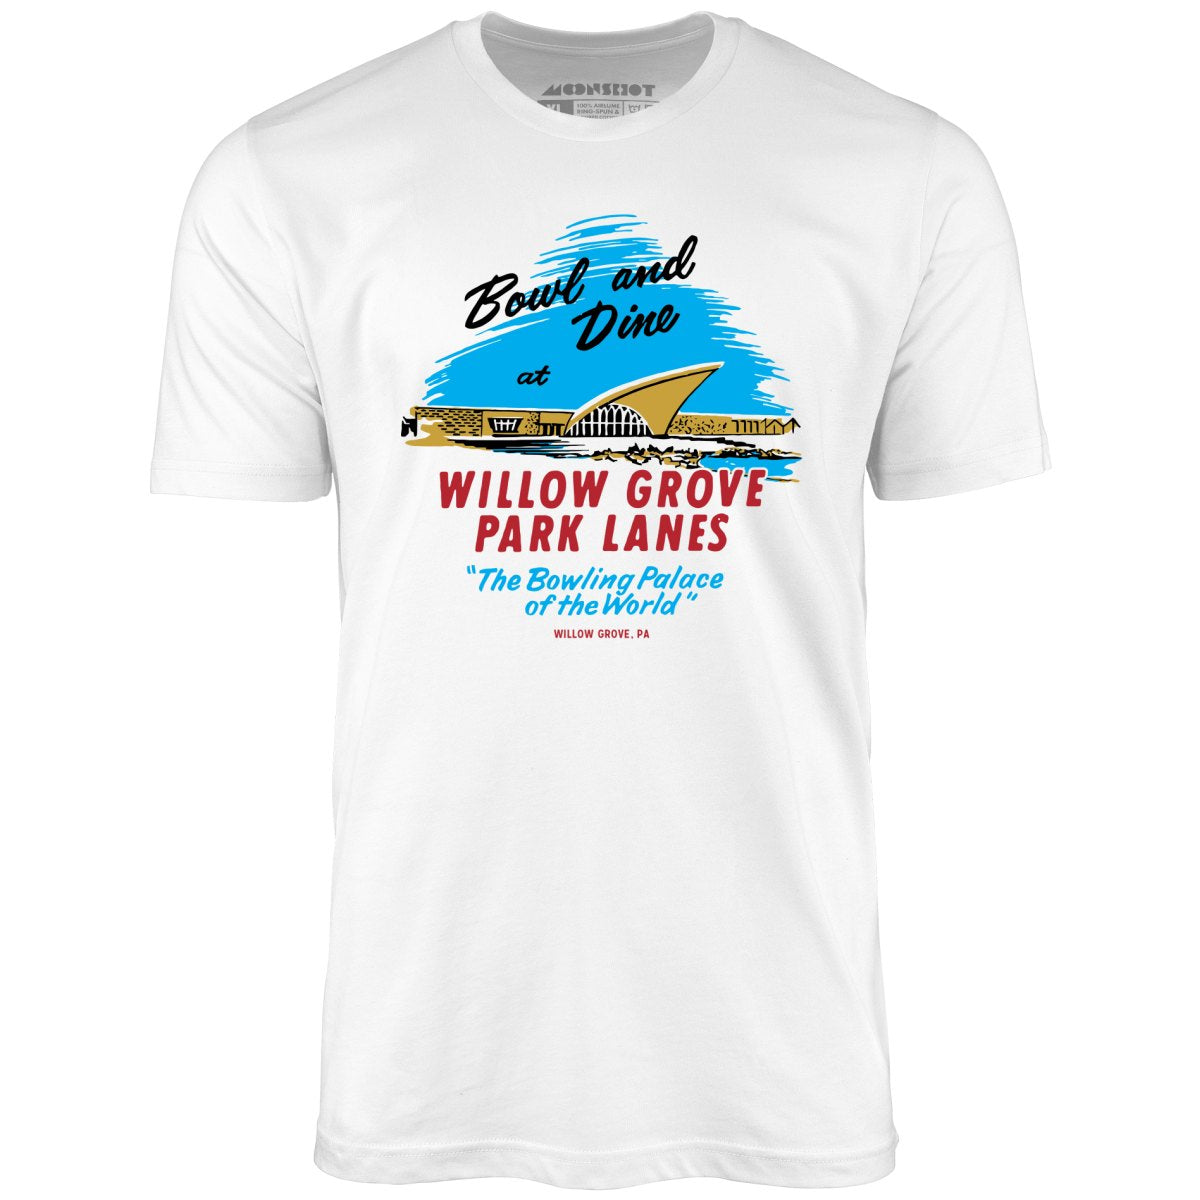 Willow Grove Park Lanes - Willow Grove, PA - Vintage Bowling Alley - Unisex T-Shirt